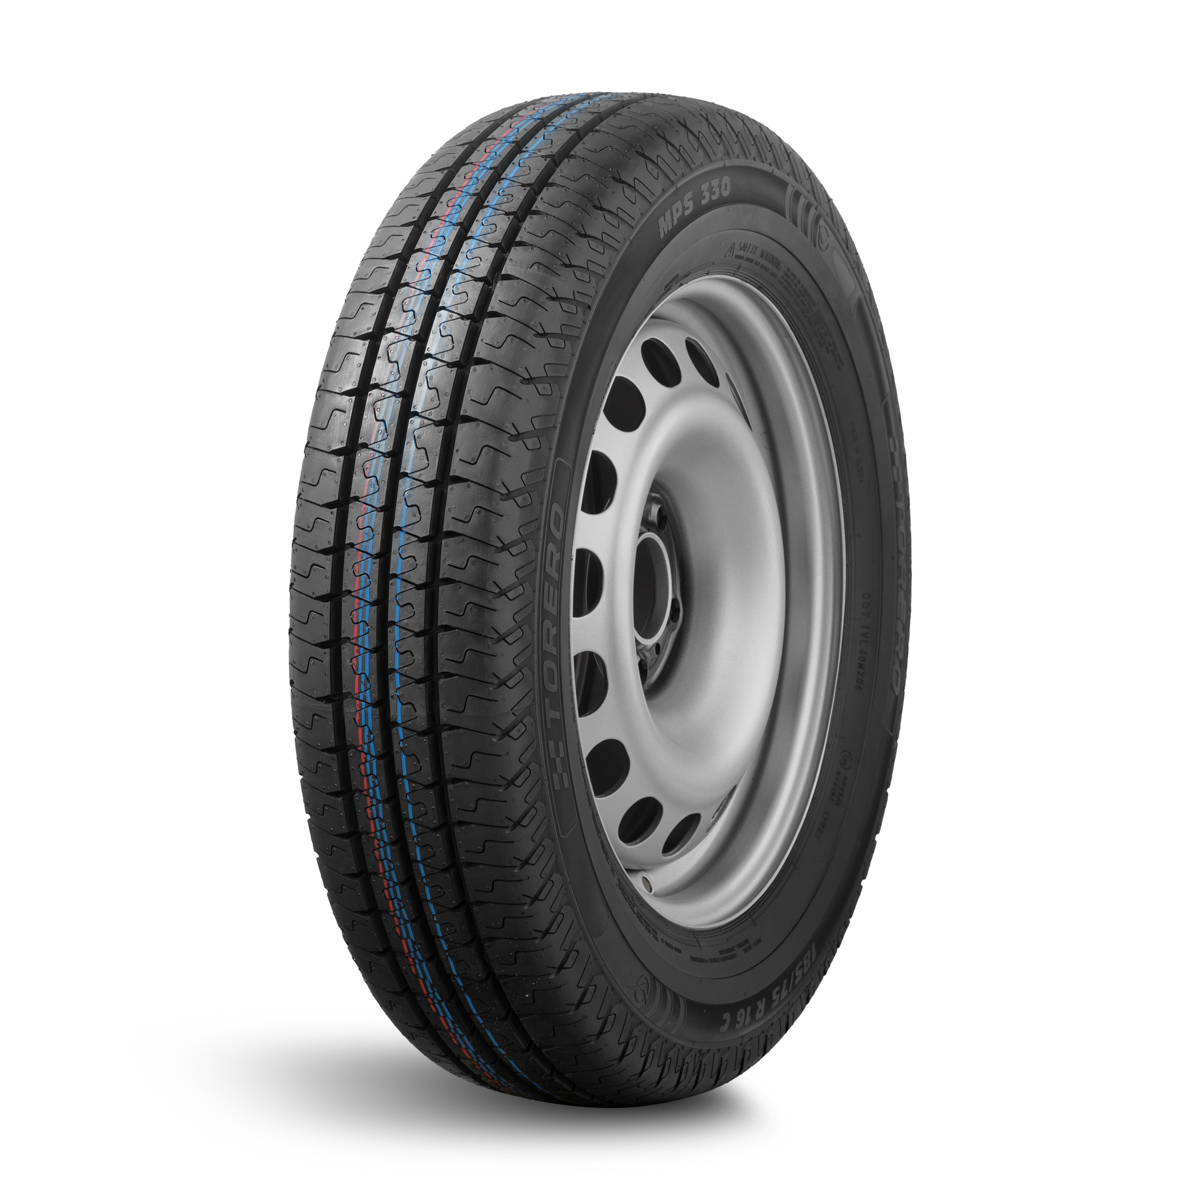 MPS330 185/75 R16 104/102R